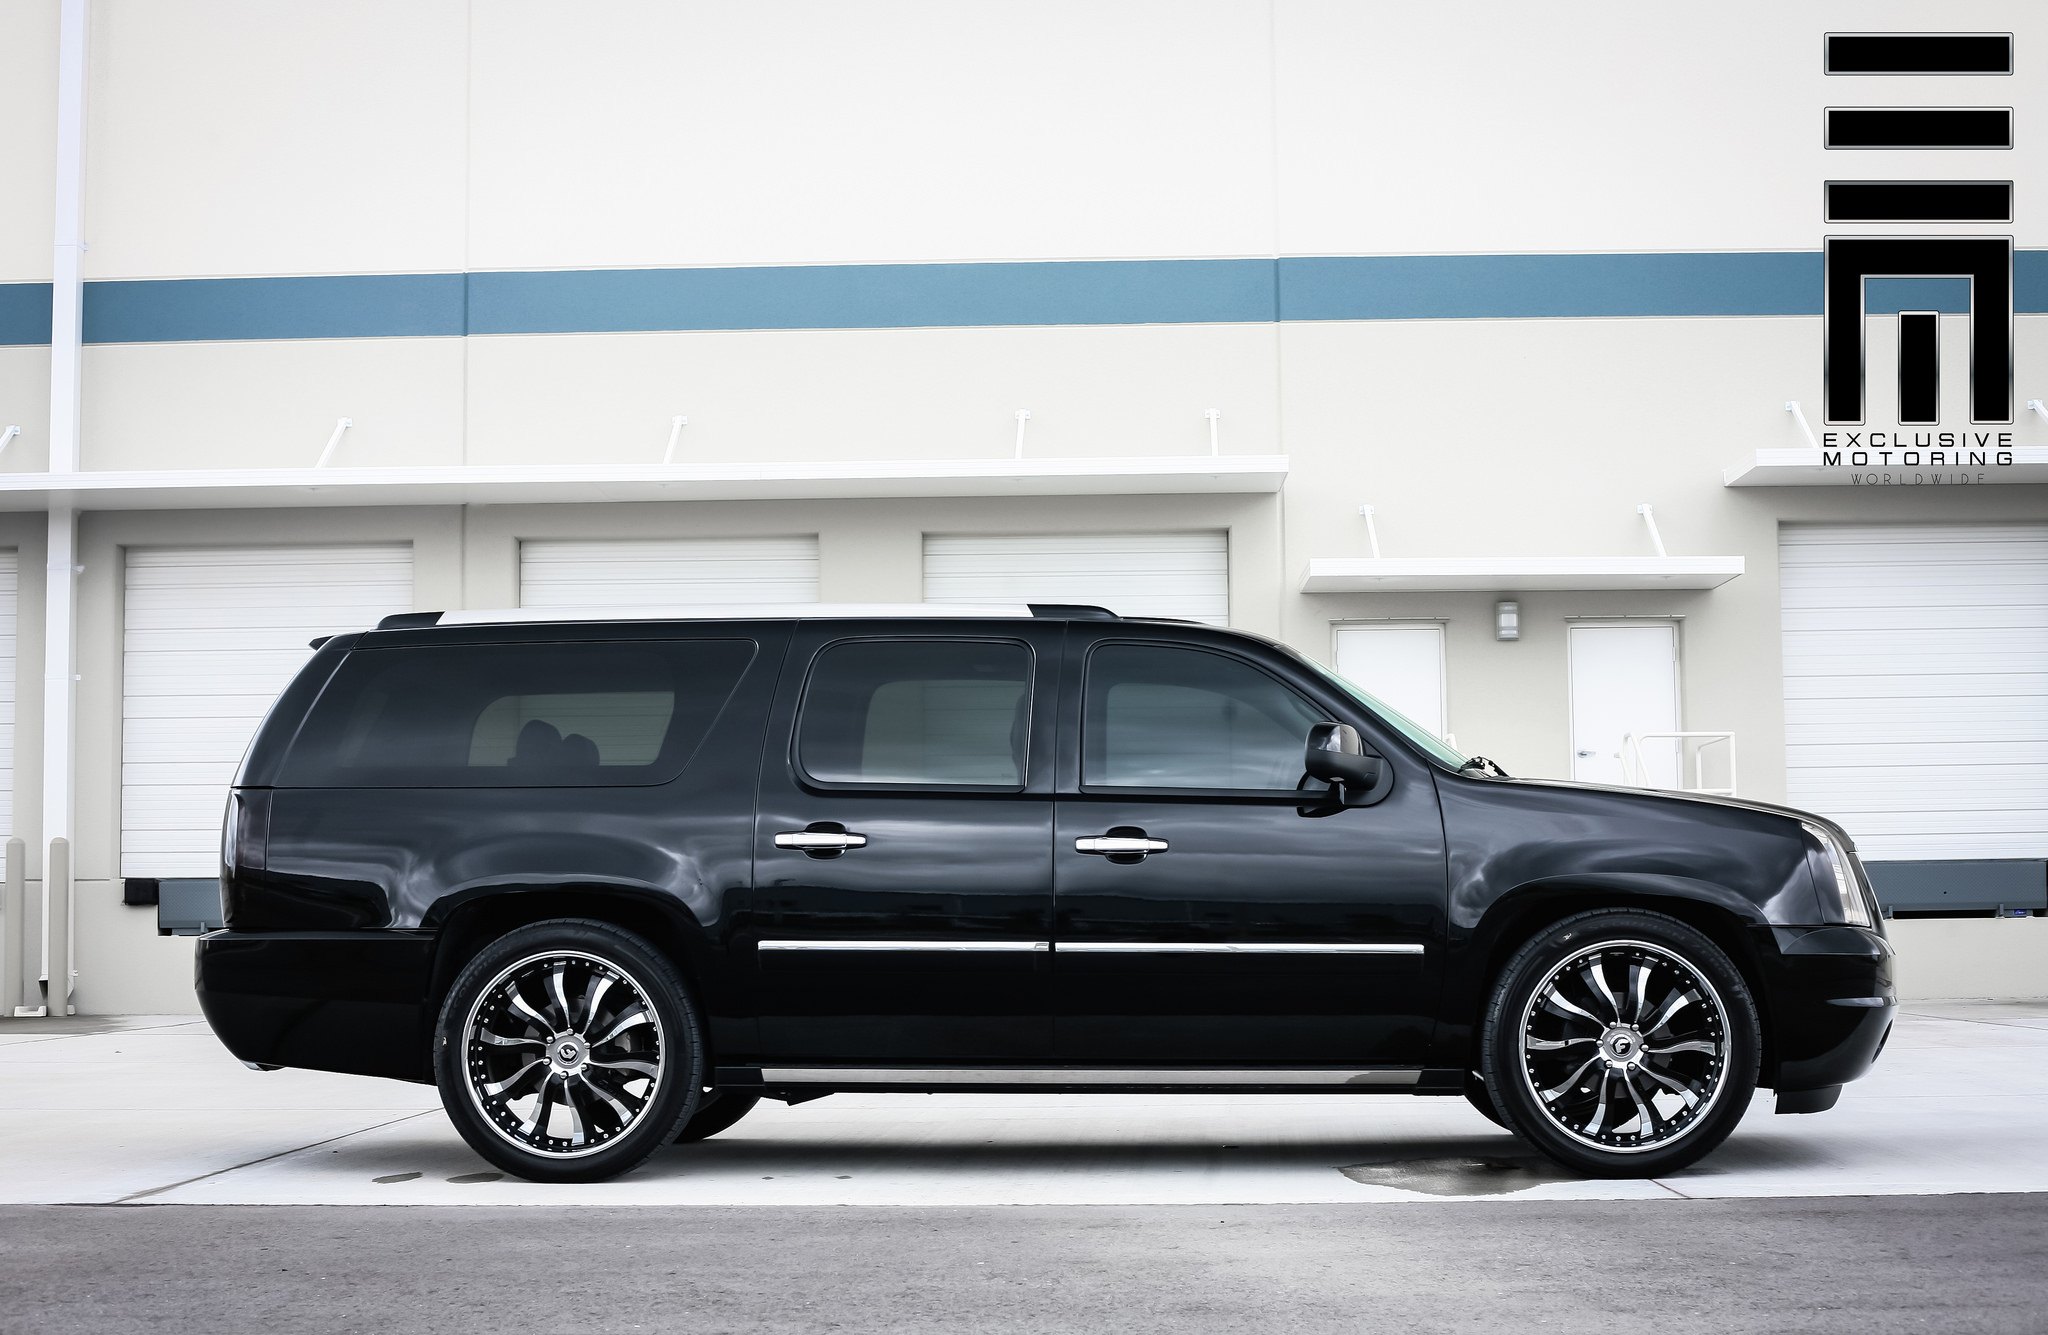 GMC Yukon XL With Tinted Windows - Photo by Exclusive Motoring